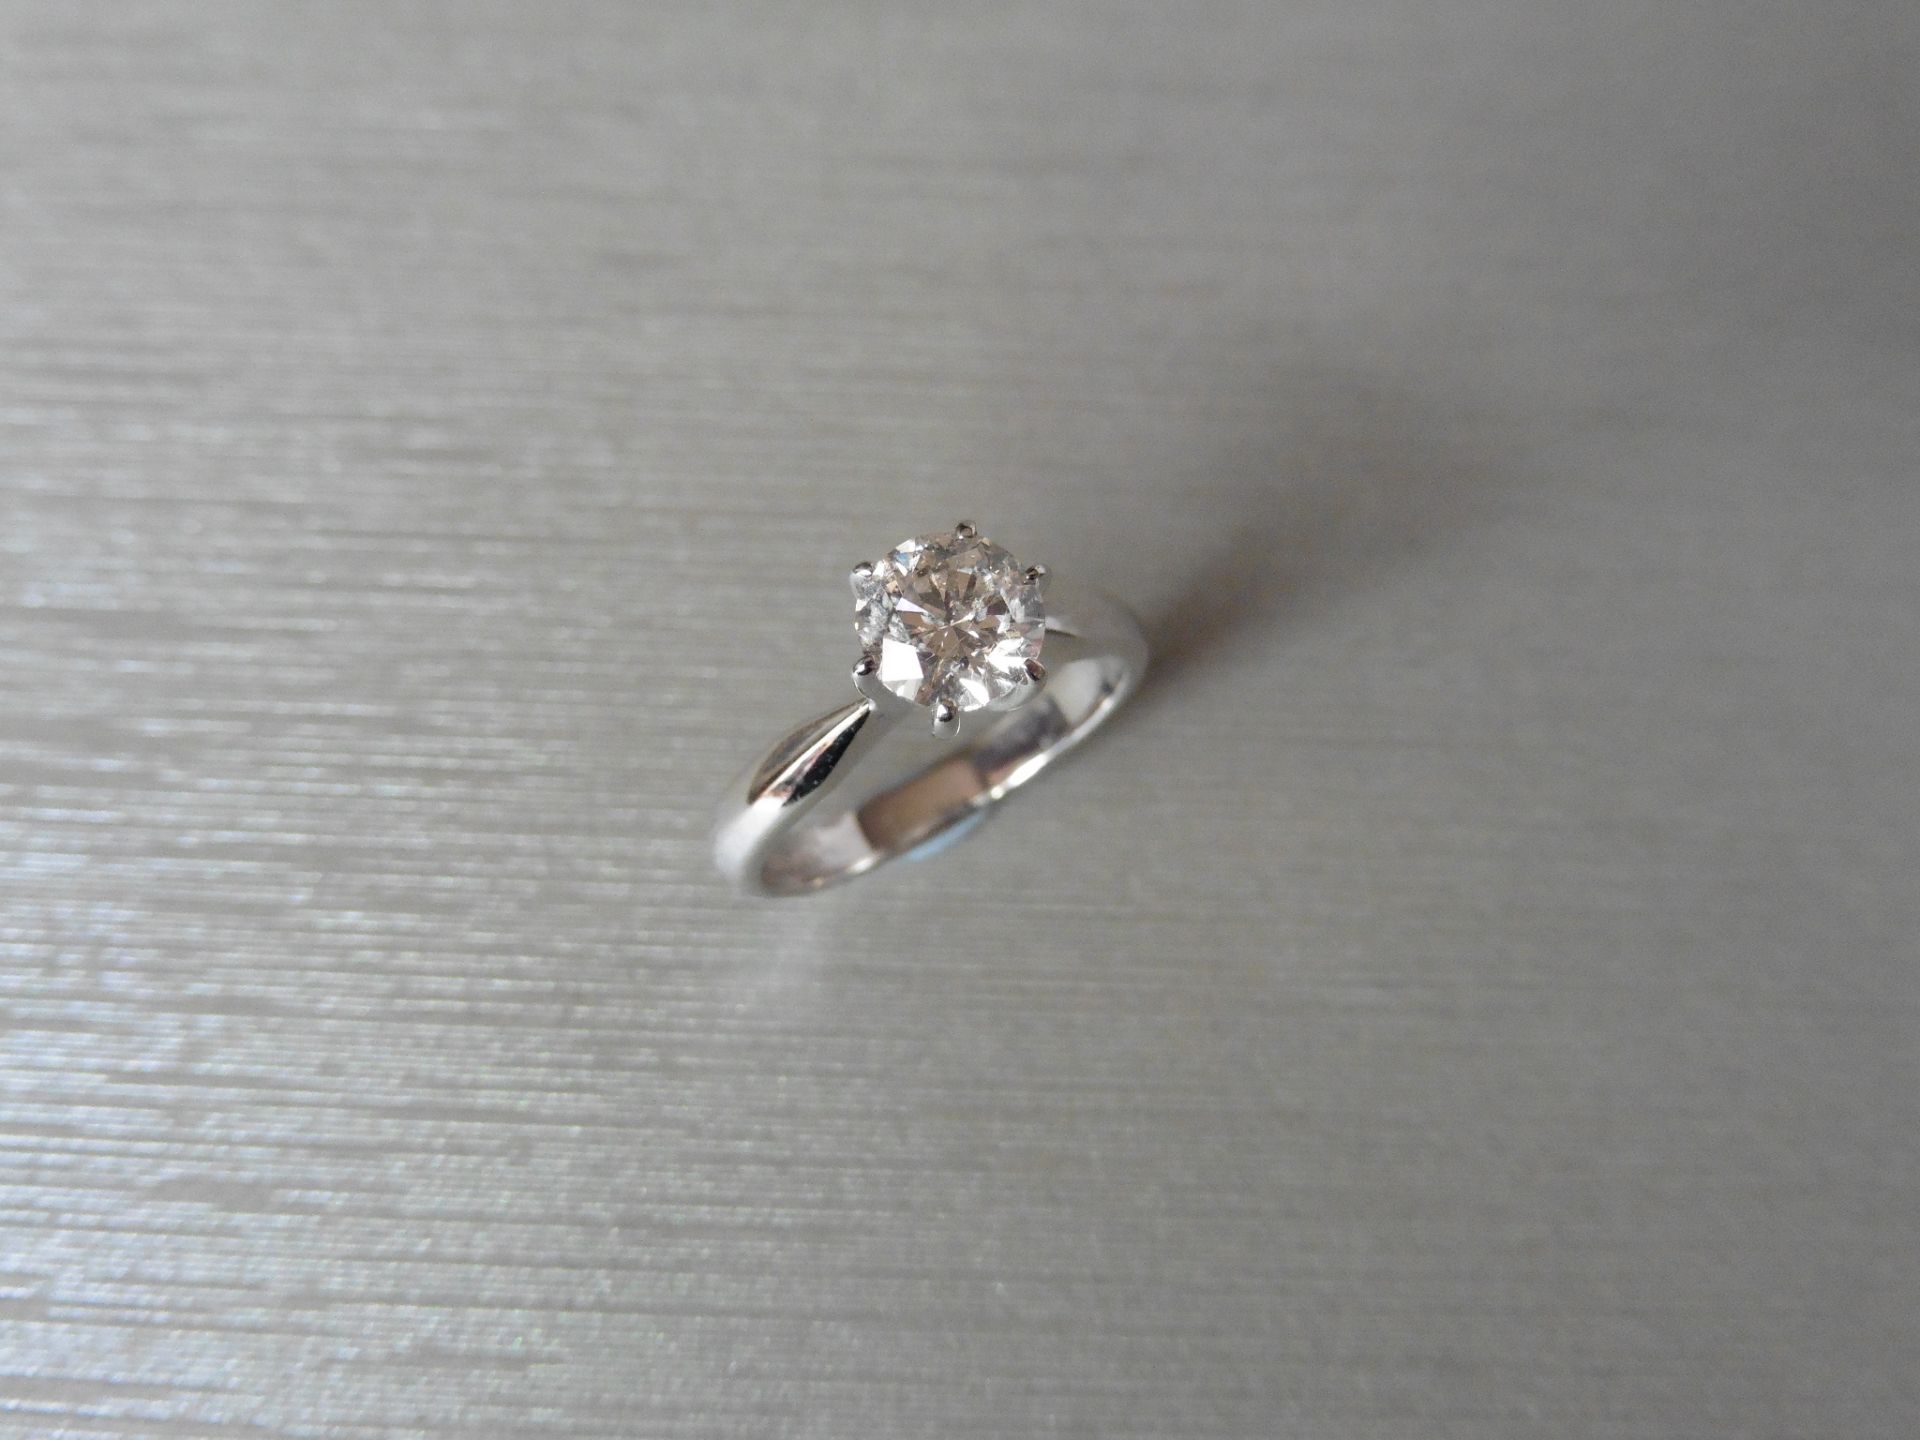 Brand new 18ct White gold diamond solitaire ring set with a 0.90ct brilliant cut diamond. This